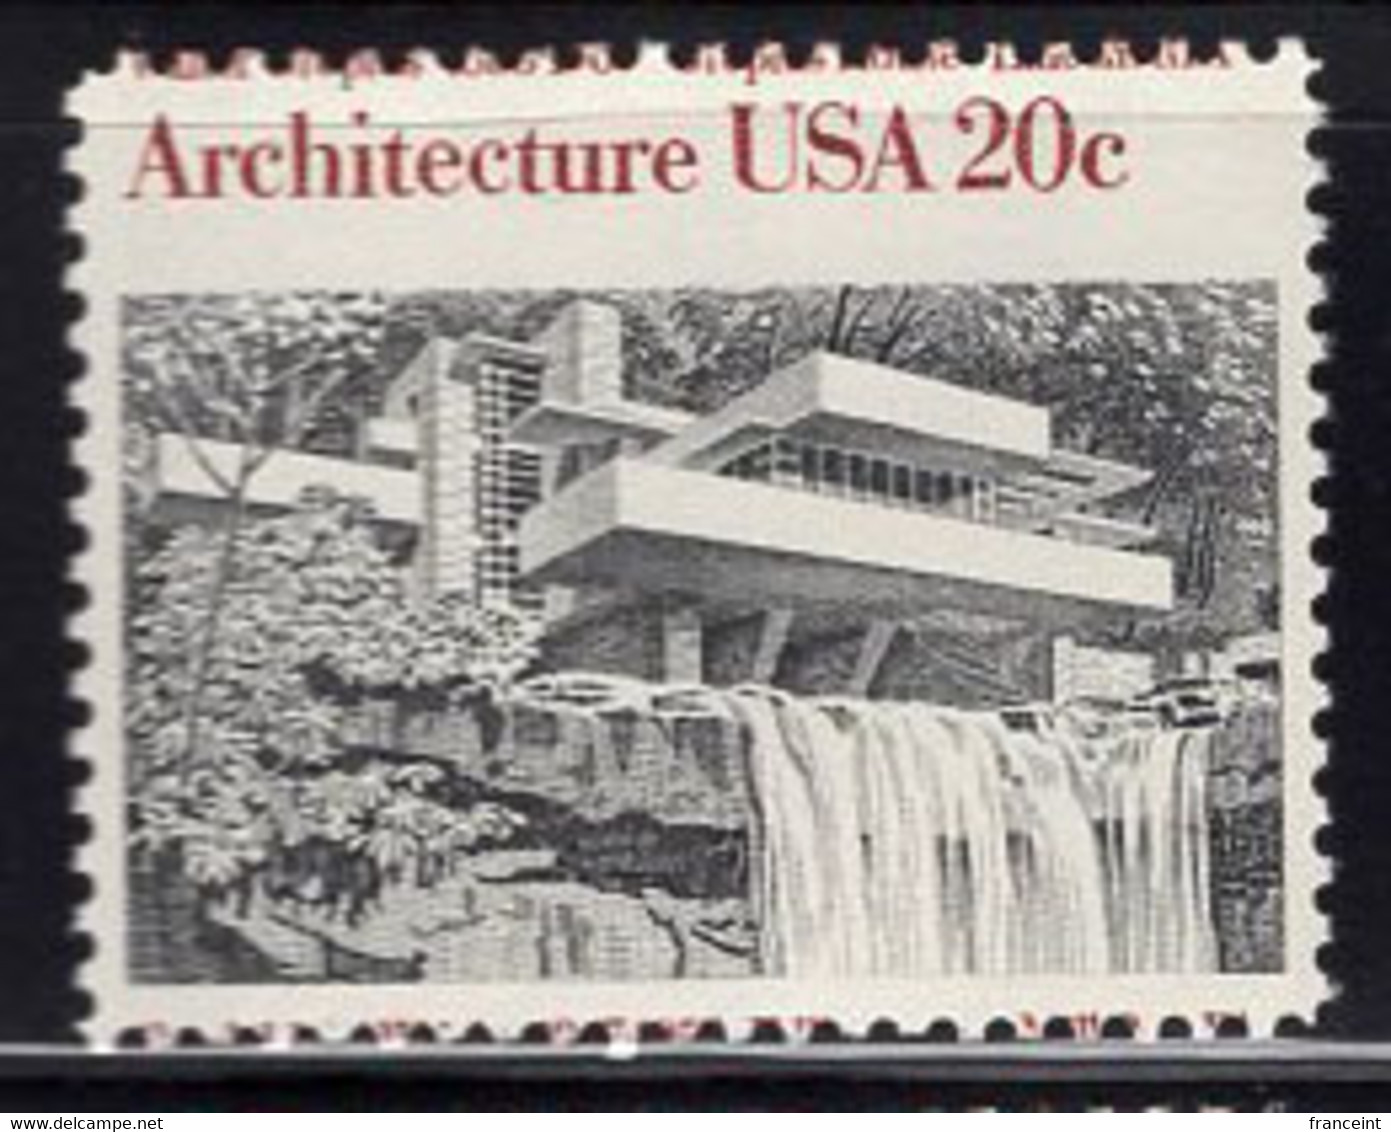 U.S.A. (1982) Fallingwater By Frank Lloyd Wright. Horizontal Misperforation Causing The Value To Appear At The Top.#2019 - Errors, Freaks & Oddities (EFOs)